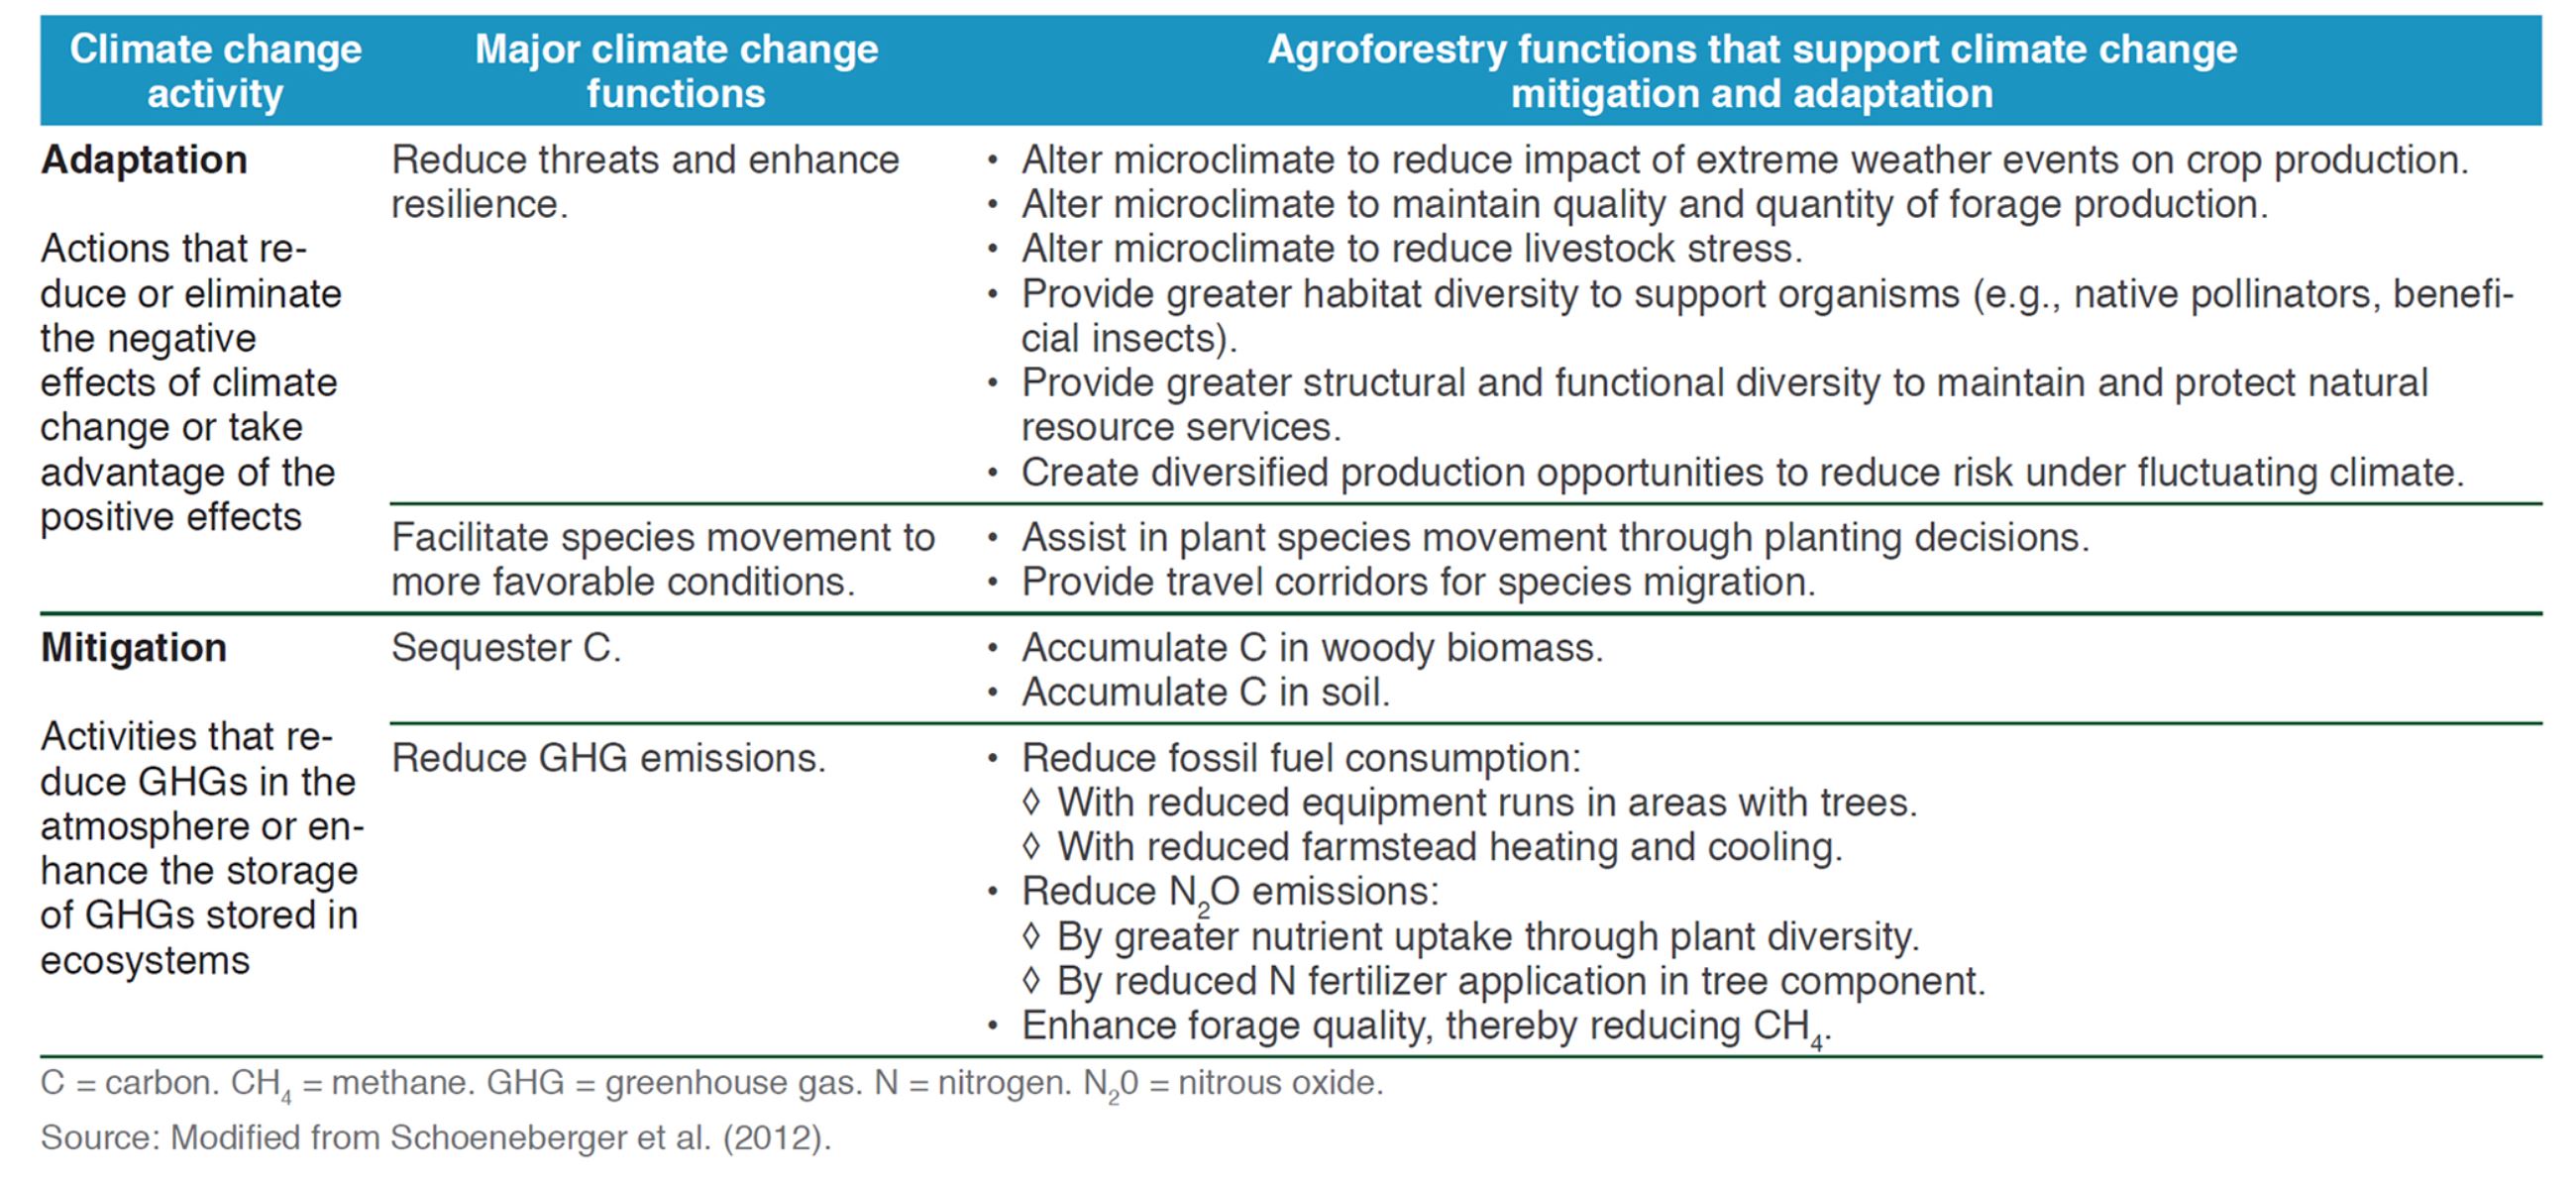 Table 1. Agroforestry functions that support climate change adaptation and mitigation